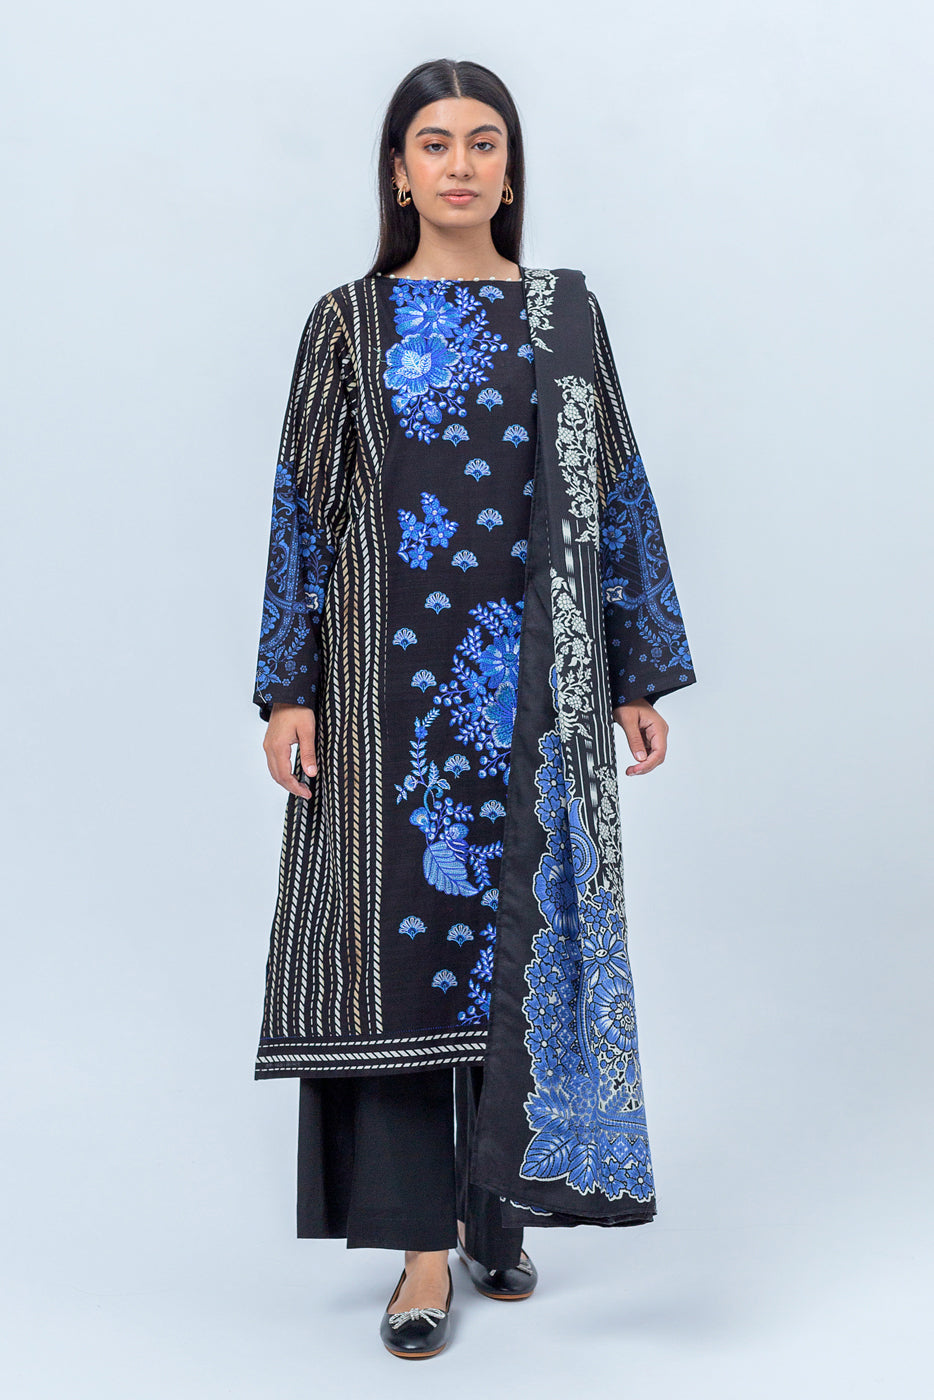 3 PIECE - EMBROIDERED KHADDAR SUIT WITH PRINTED SHAWL - WONDROUS BLACK (UNSTITCHED) - BEECHTREE